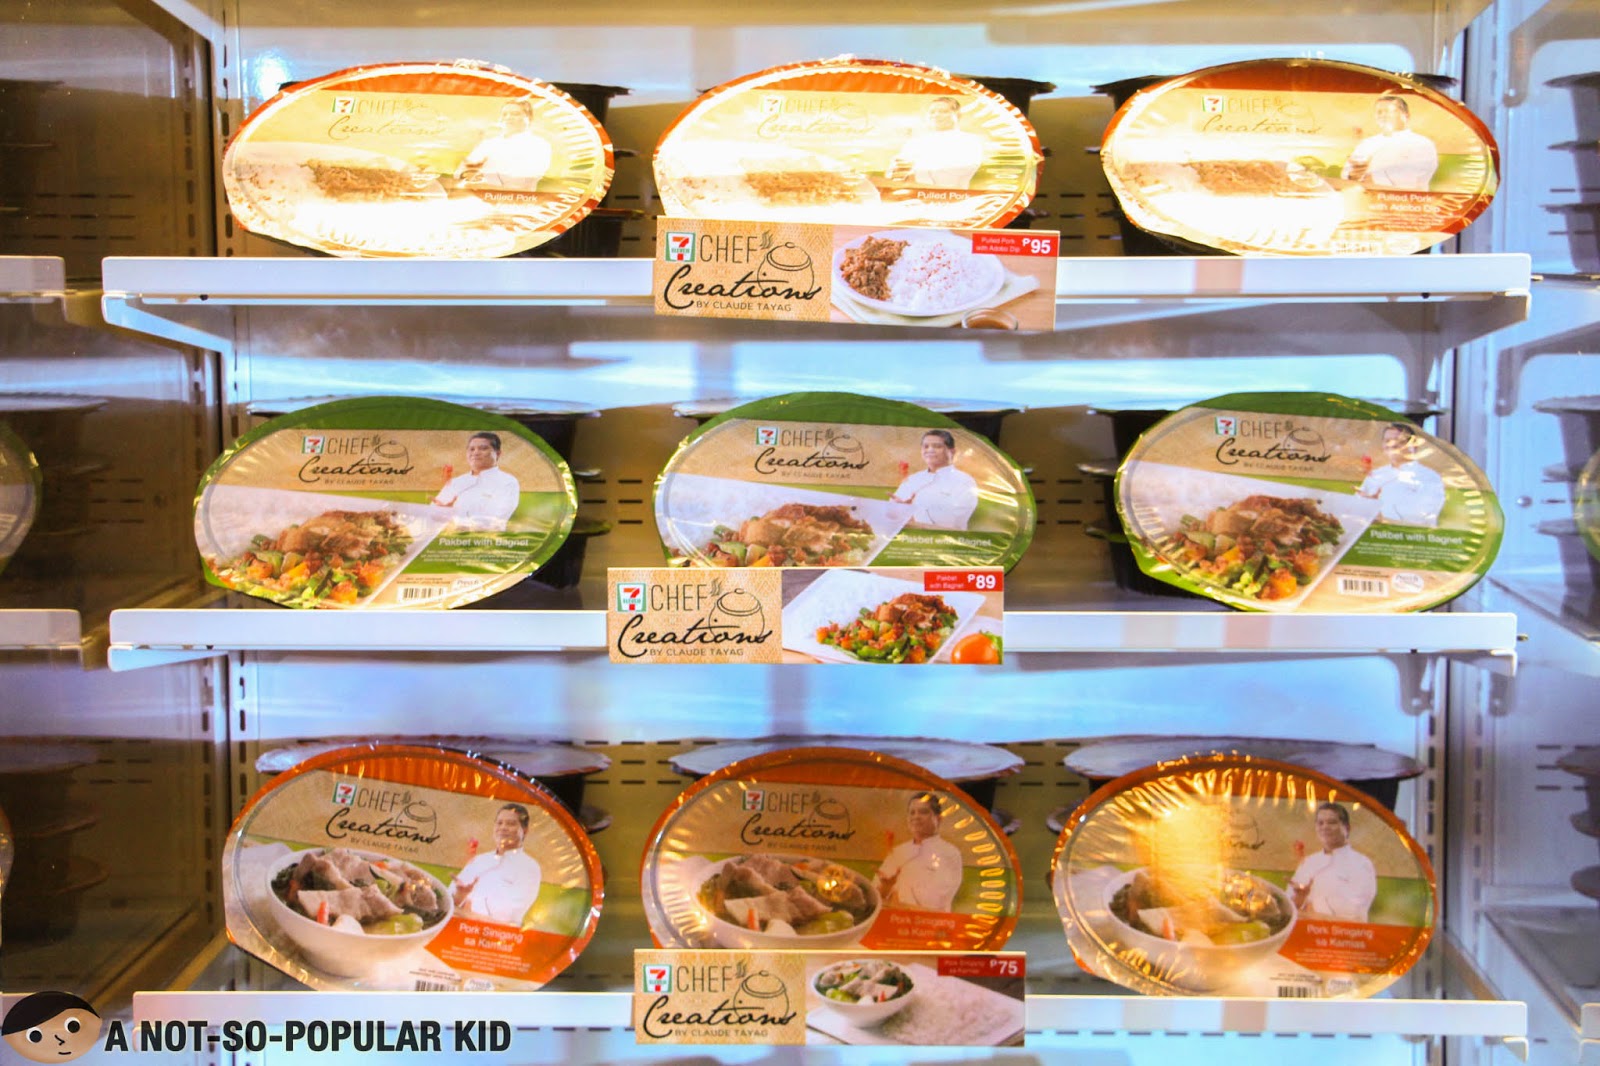 7 Eleven's Chef Creations - Affordable yet Premium Filipino Food